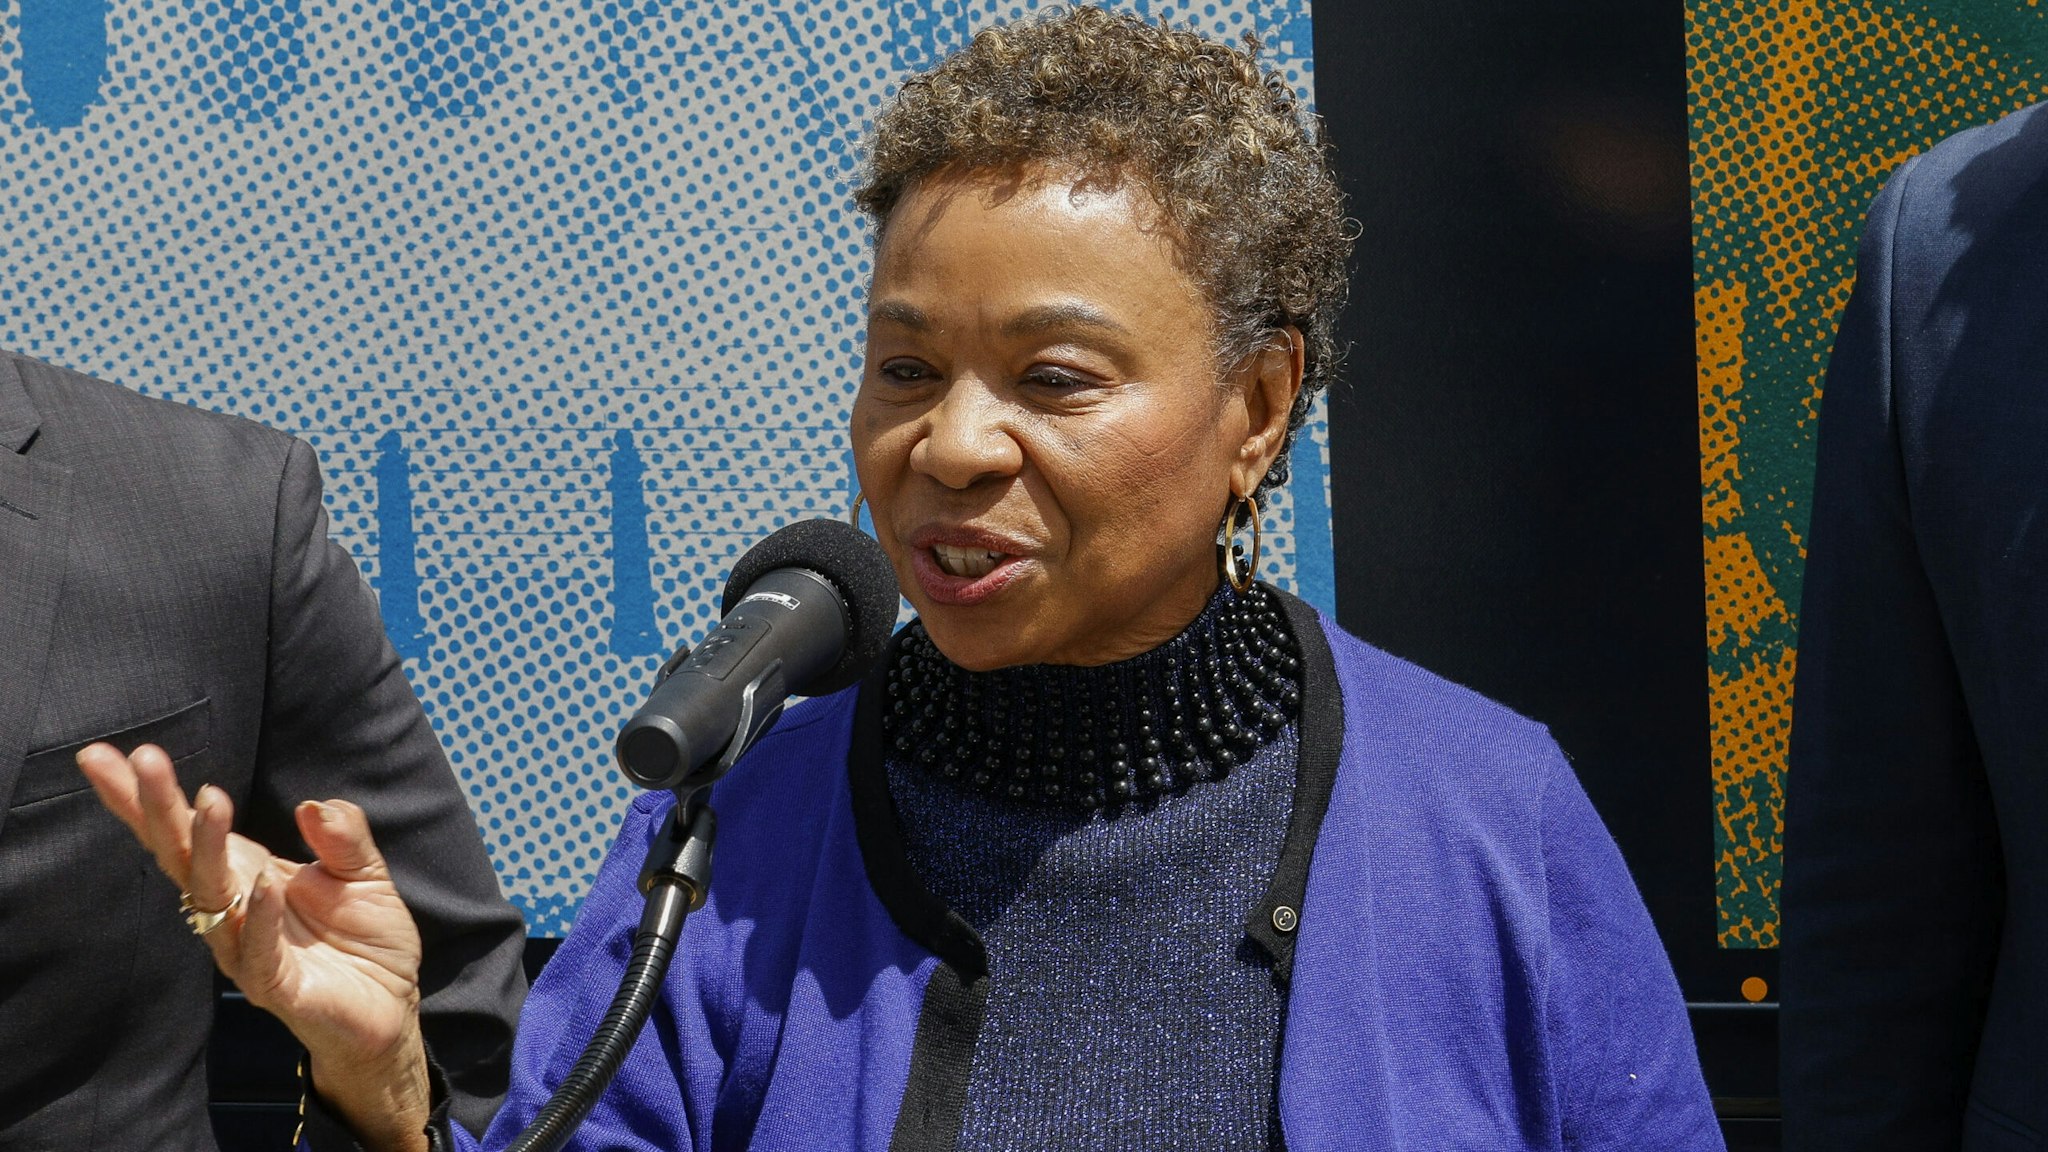 OAKLAND, CALIFORNIA - MAY 21: Congresswoman Barbara Lee of California speaks at a "Just Majority" nationwide bus tour press conference to call for reforms to the U.S. Supreme Court on May 21, 2023 in Oakland, California.